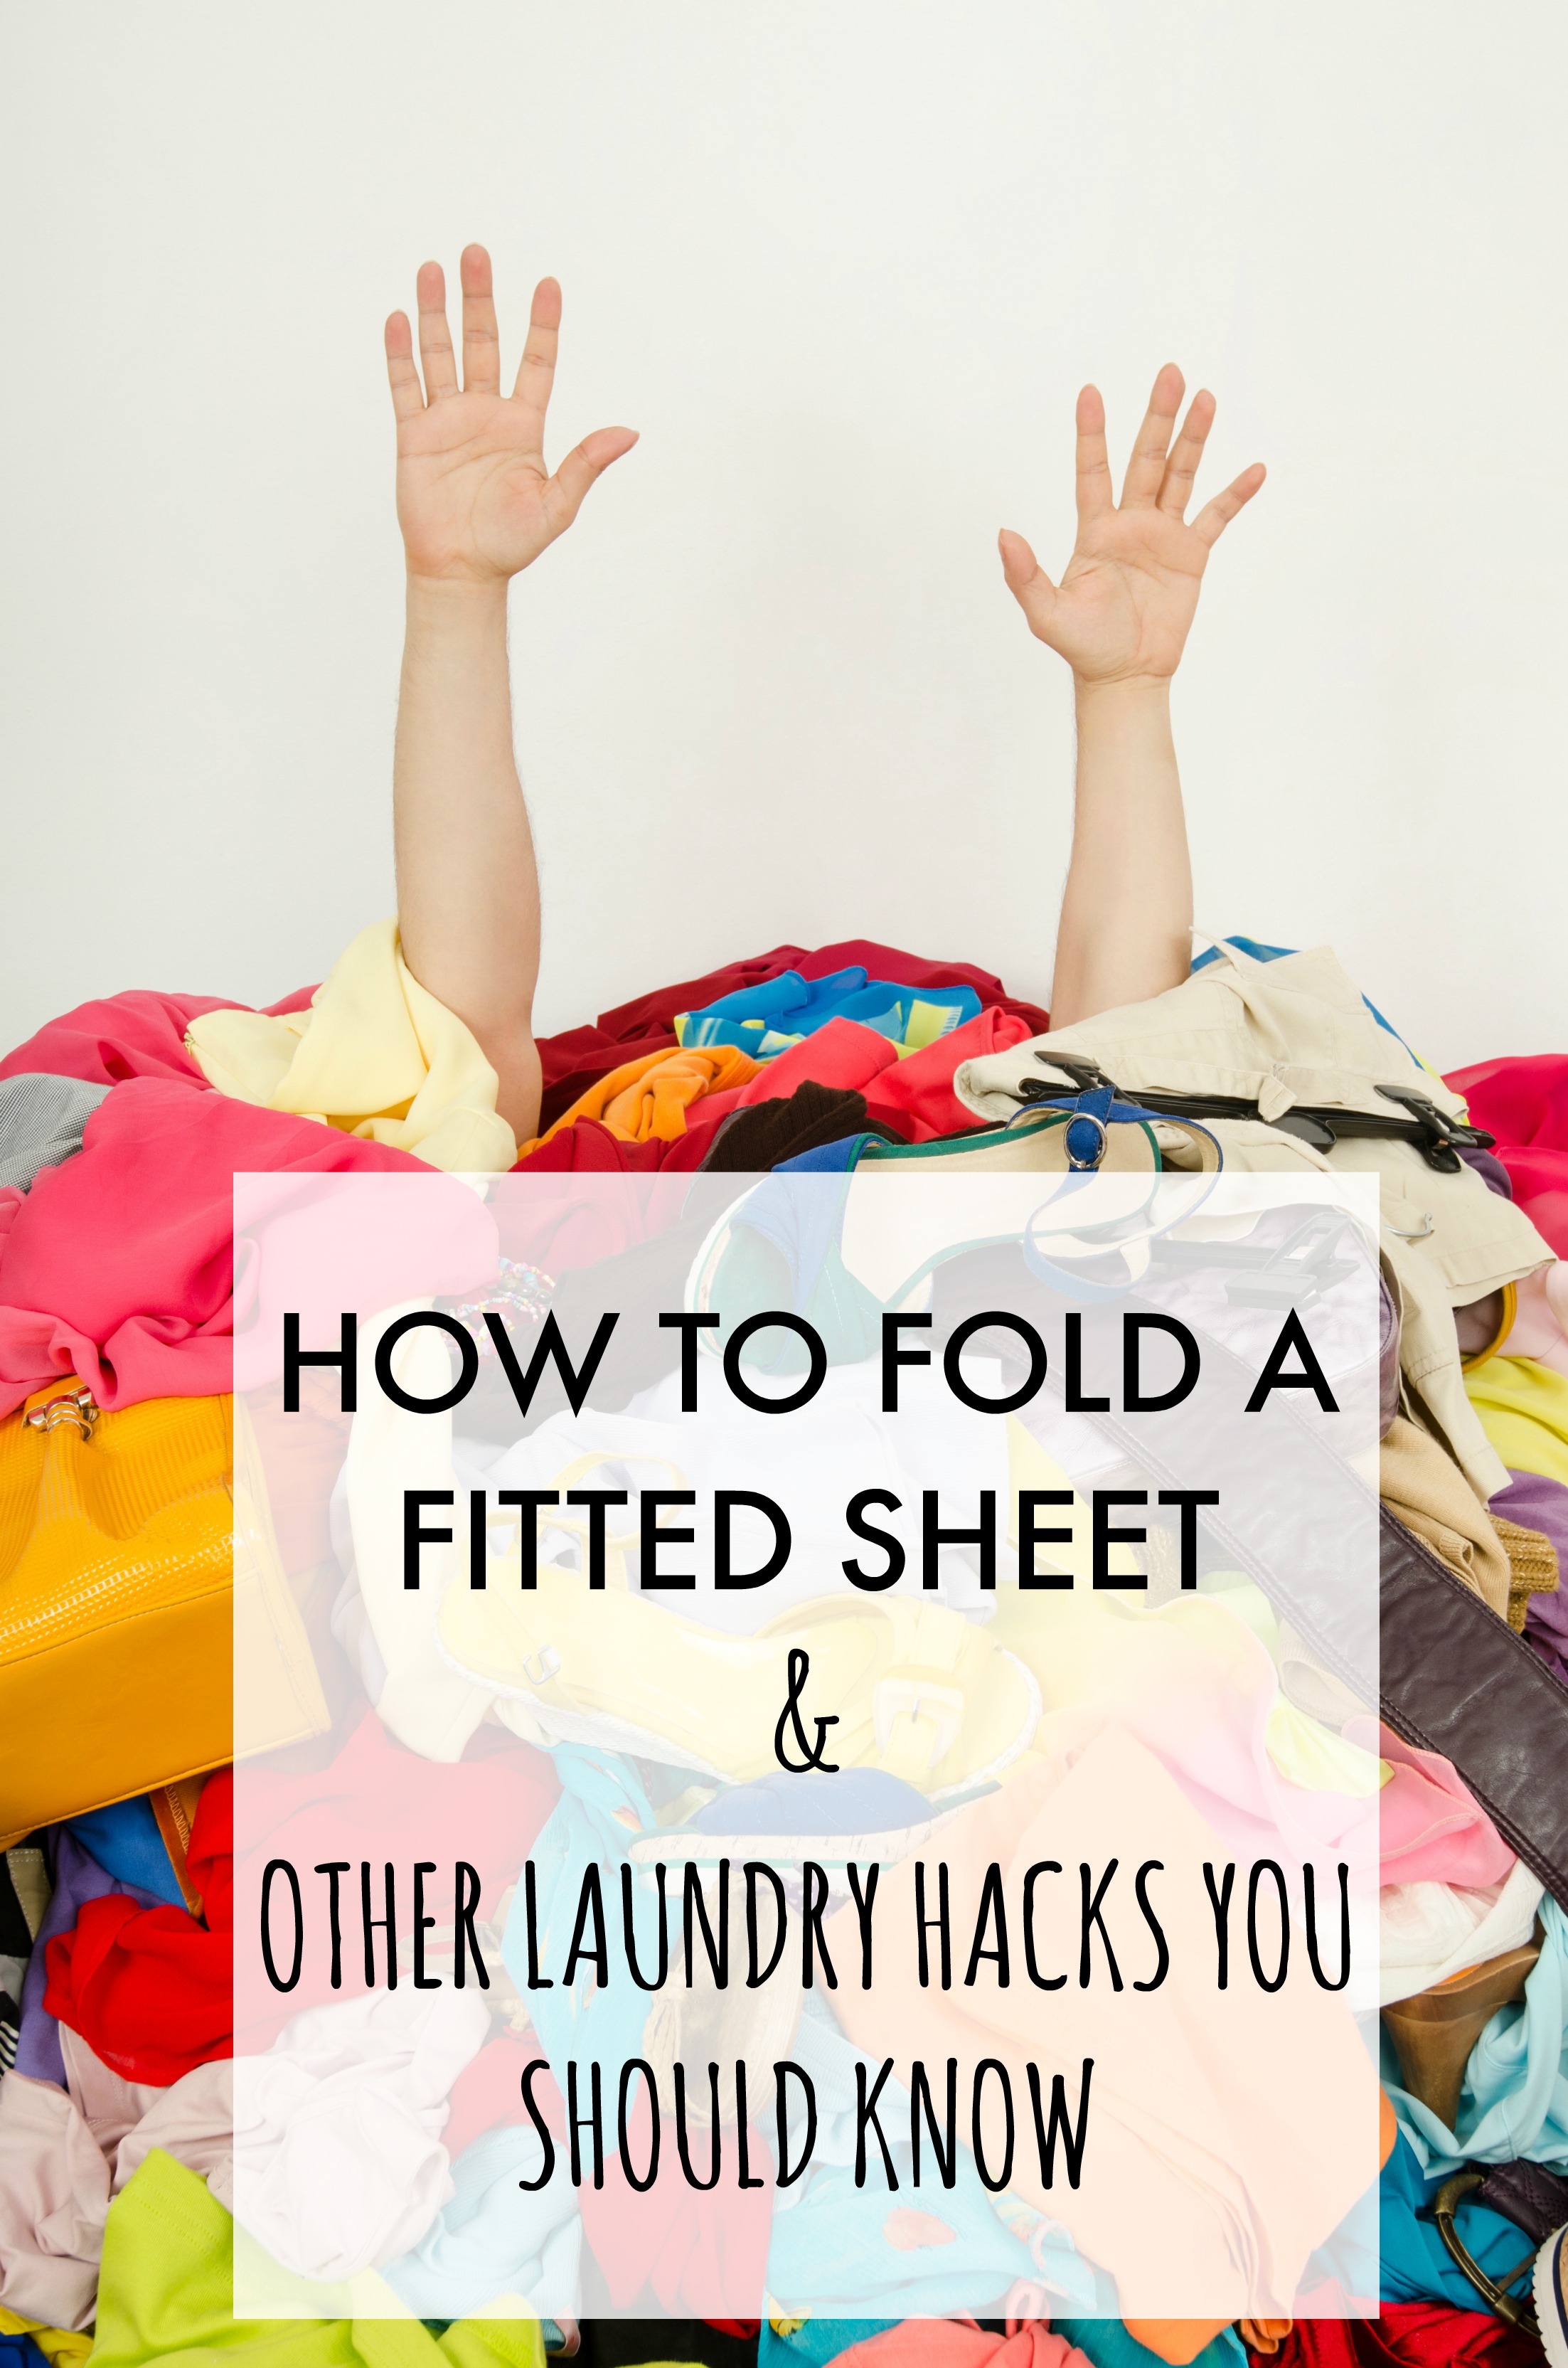 How To Fold a Fitted Sheet and Other Laundry Hacks You Should Know